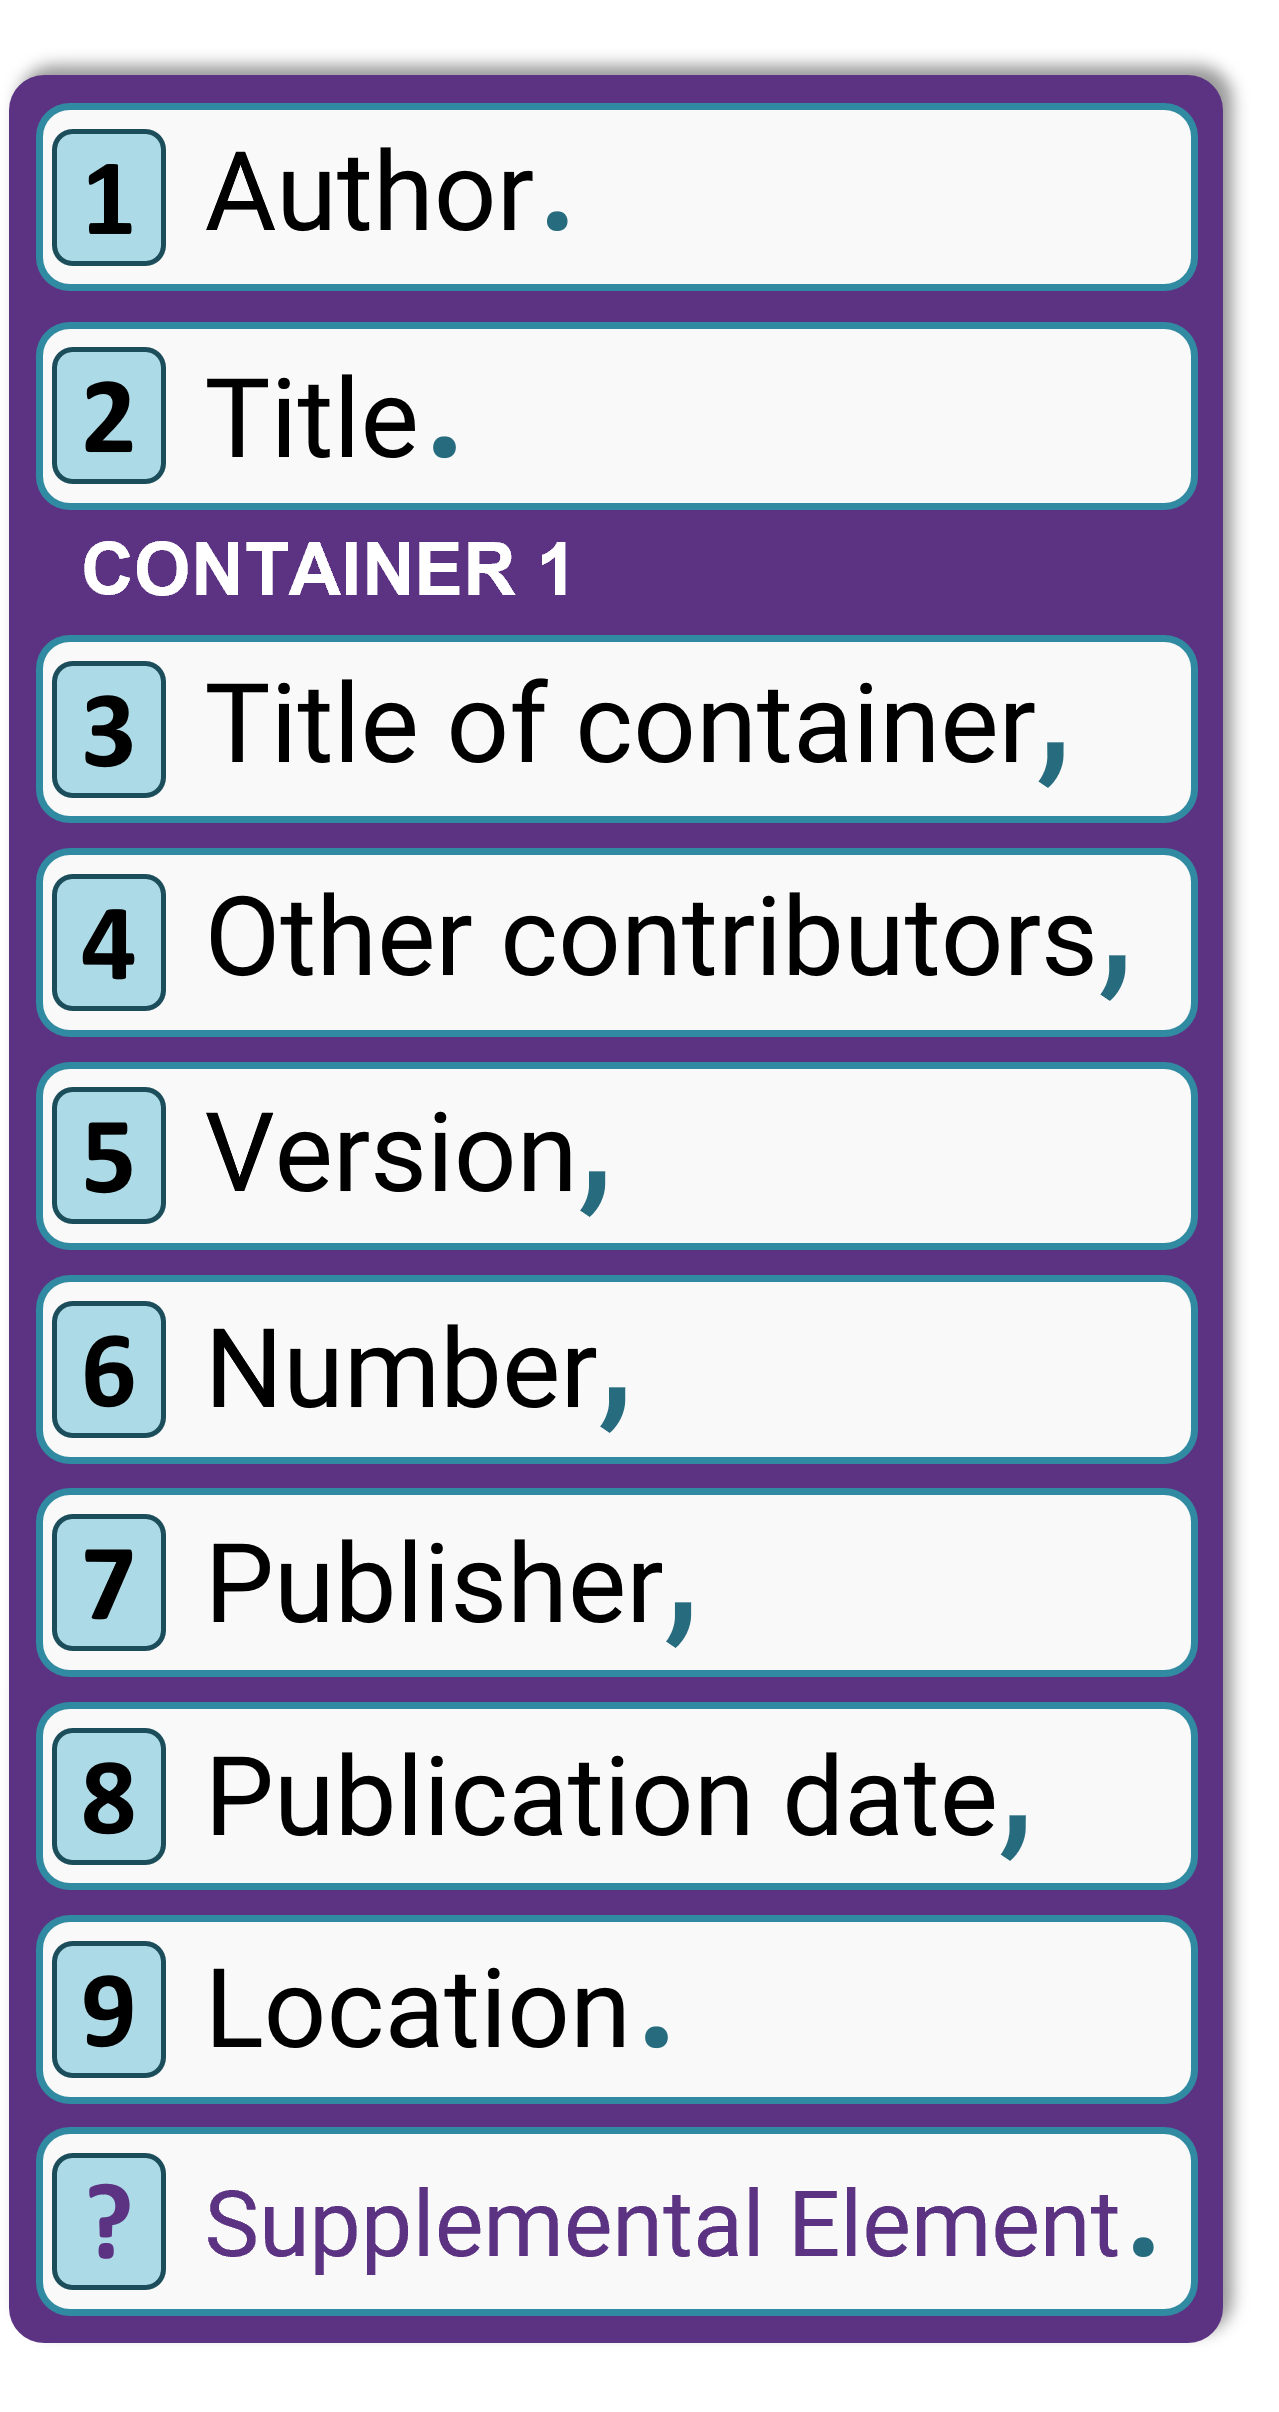 Author. Title. Title of container, other contributors, version, number, publisher, publication date, location, supplemental element.